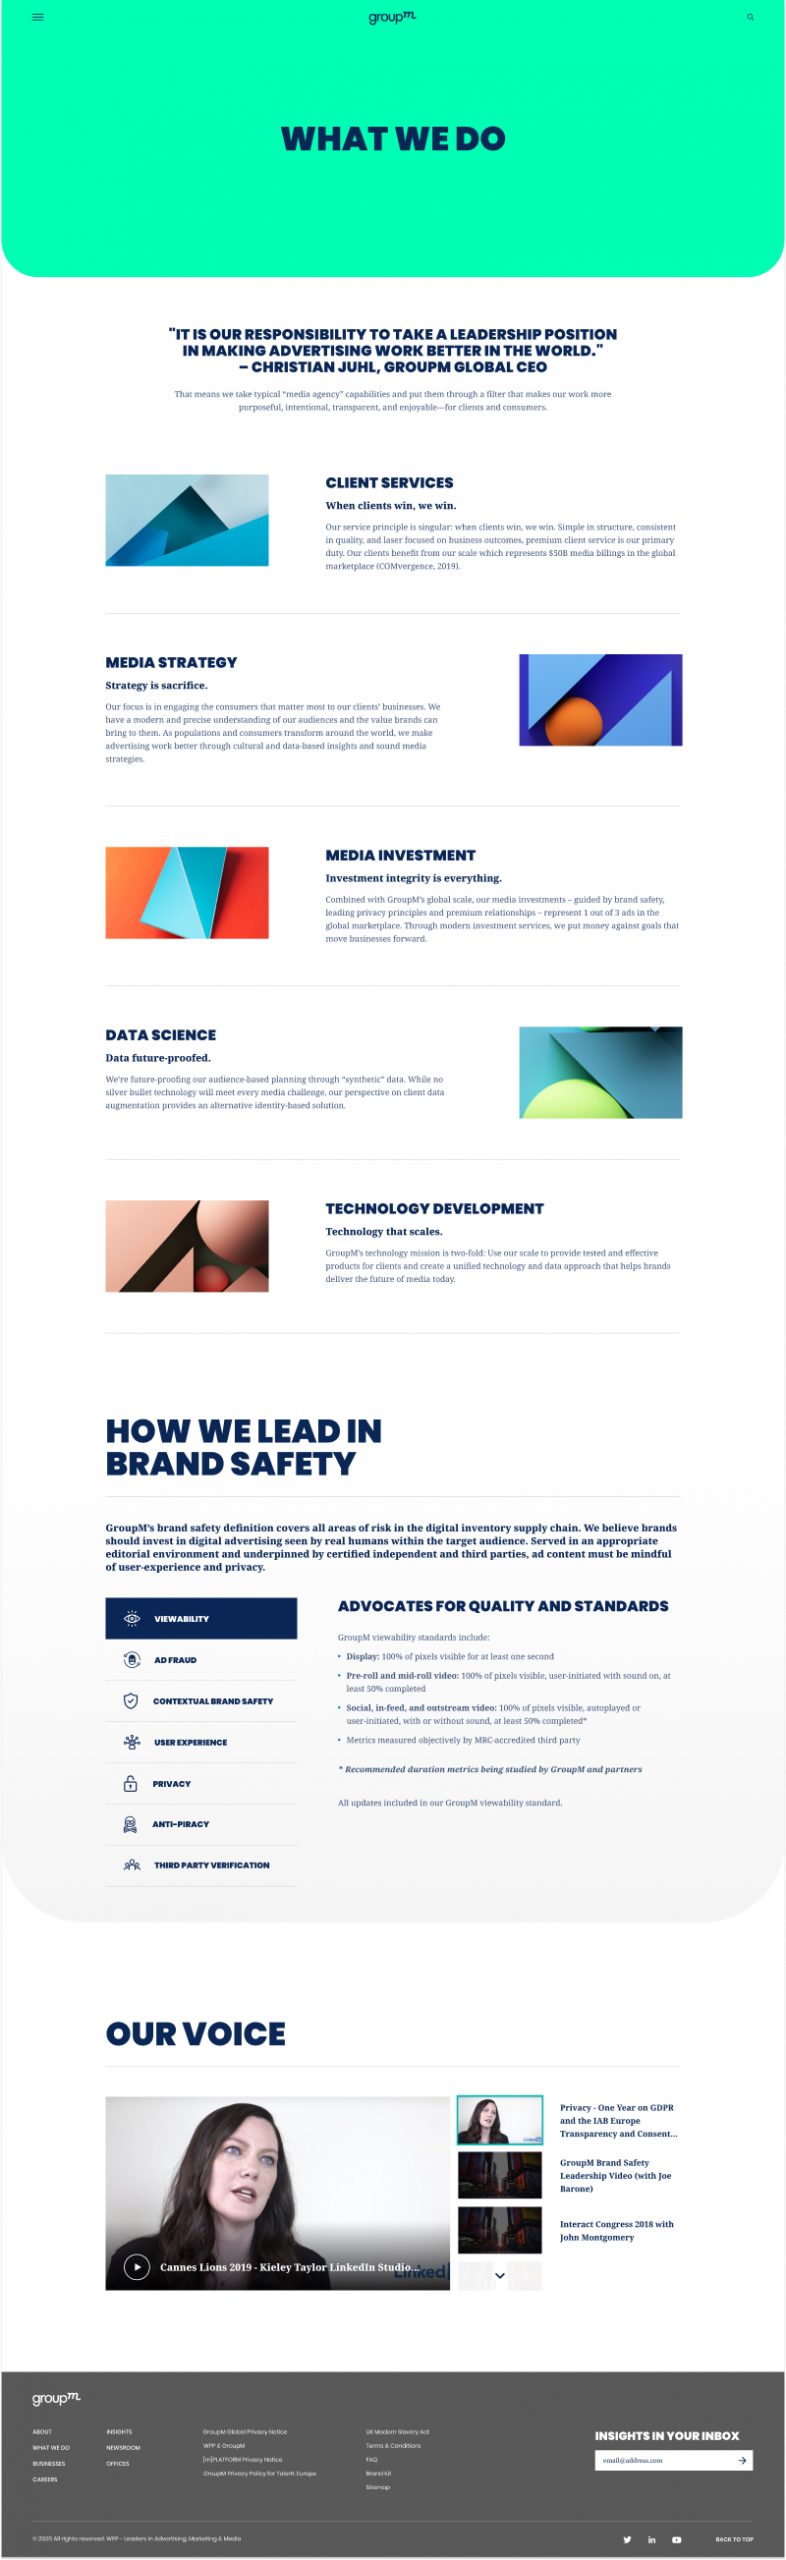 GroupM's Inner Pages Design and Development